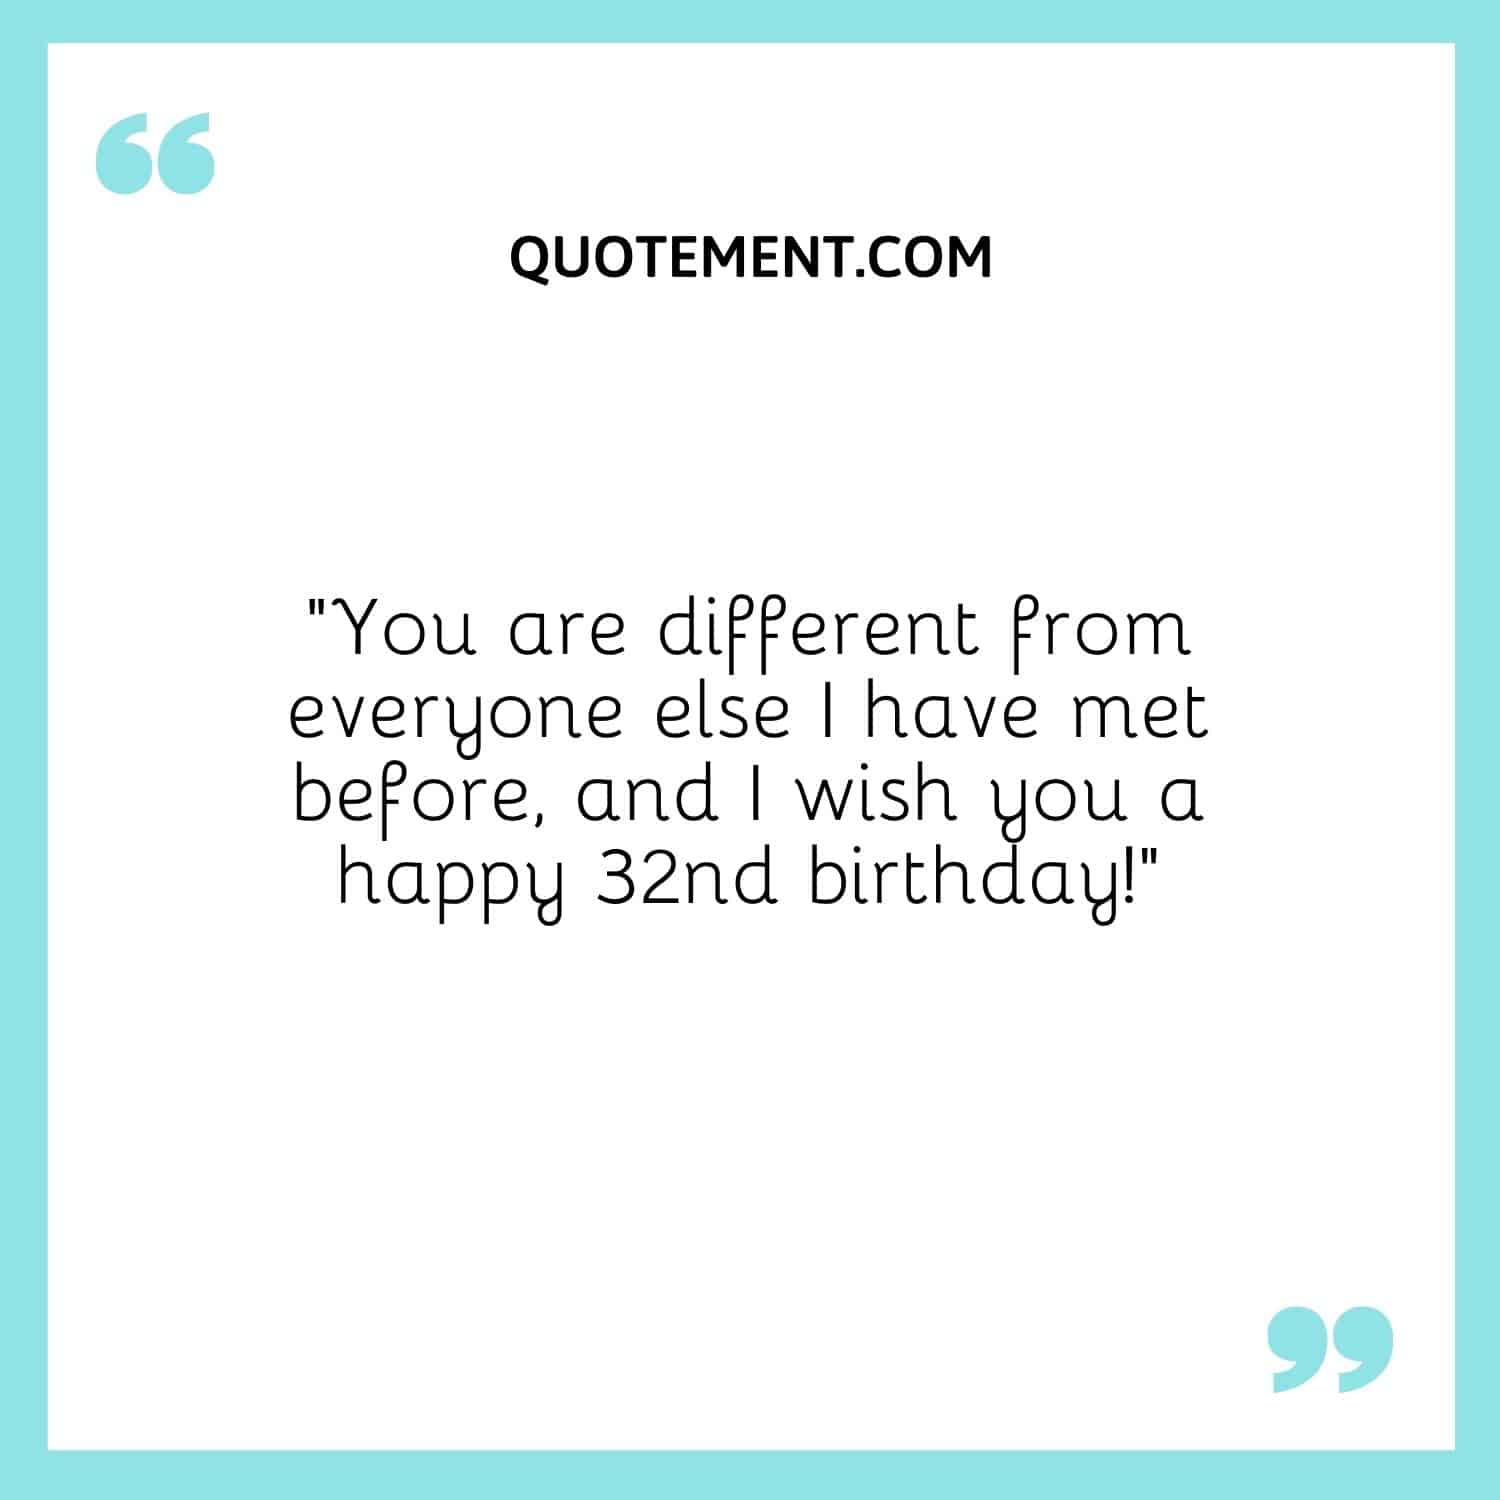 “You are different from everyone else I have met before, and I wish you a happy 32nd birthday!”